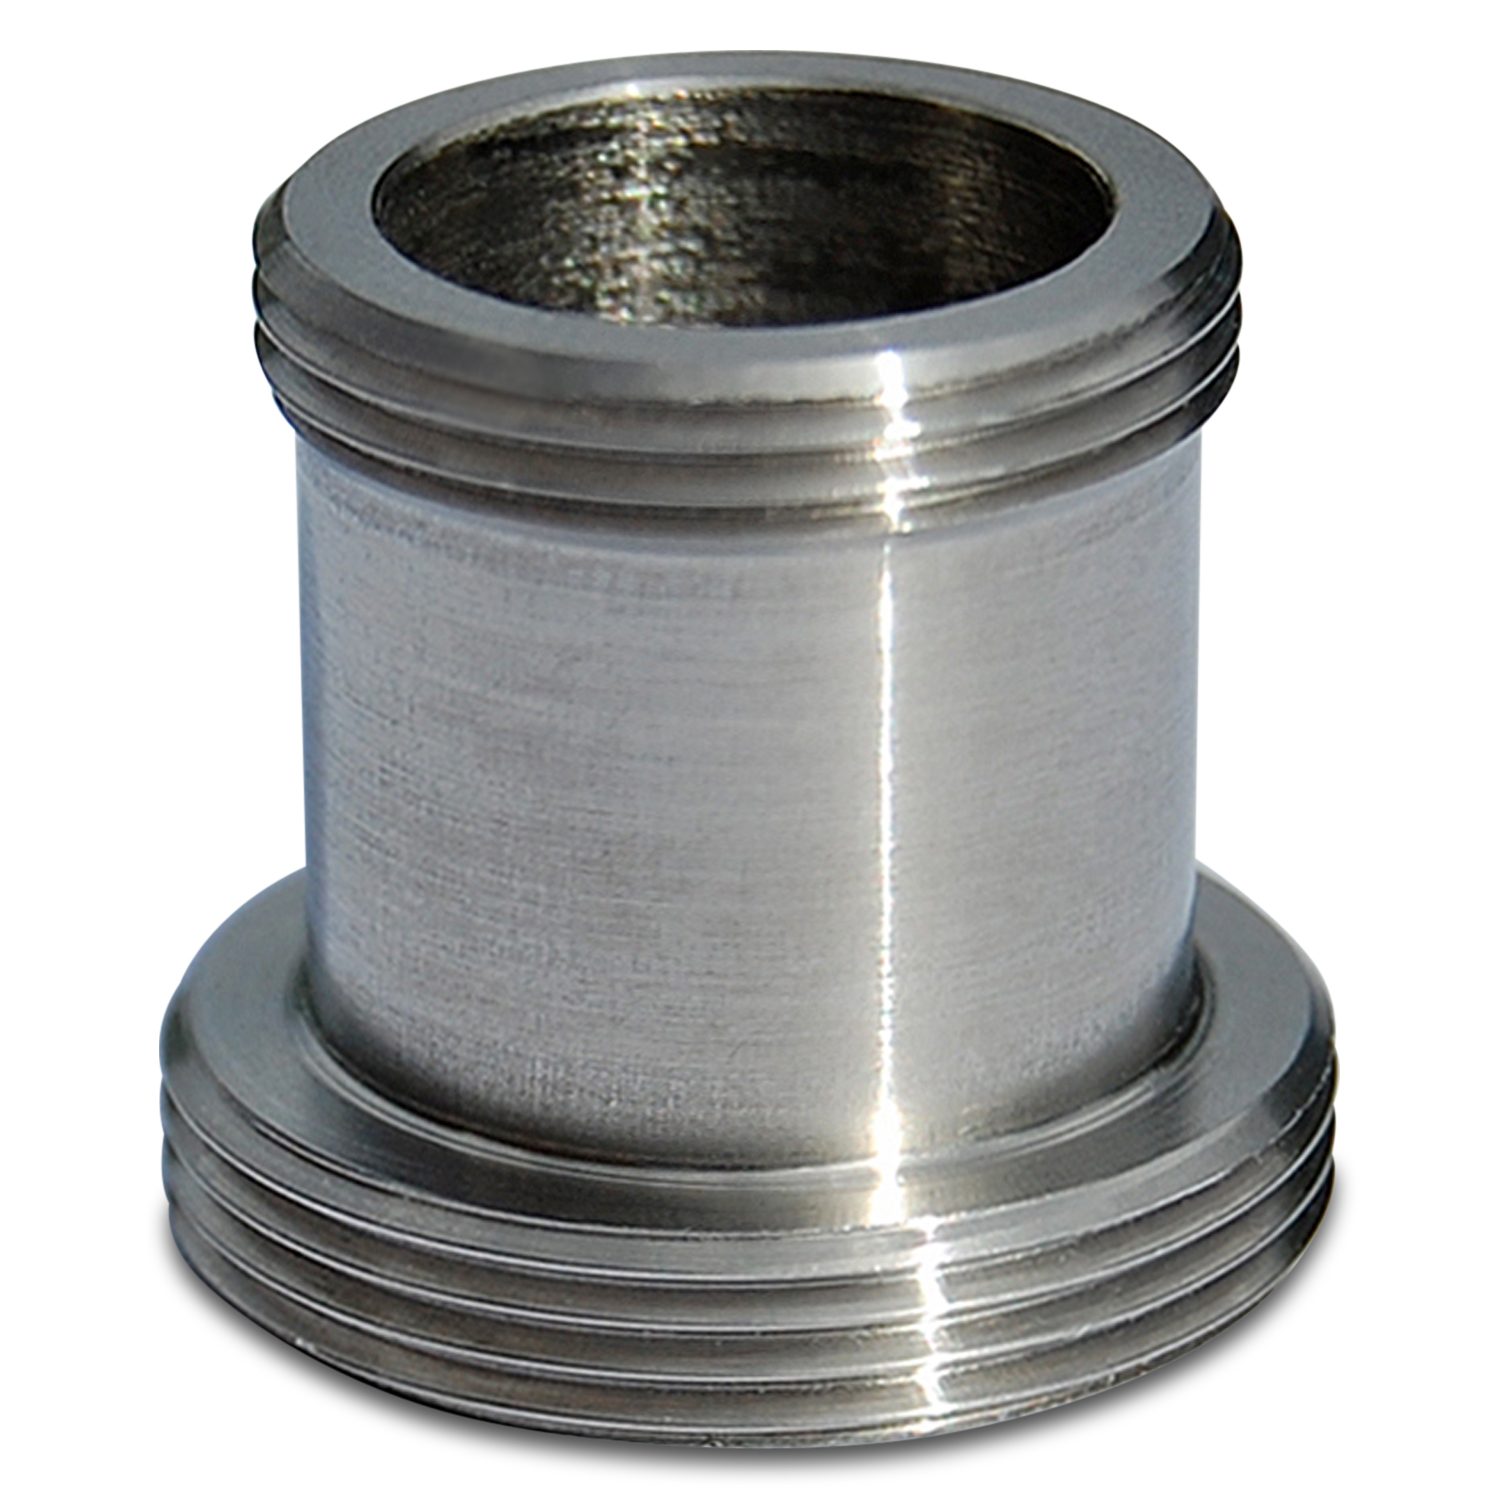 AD-30N Adapter from Stainless Steel